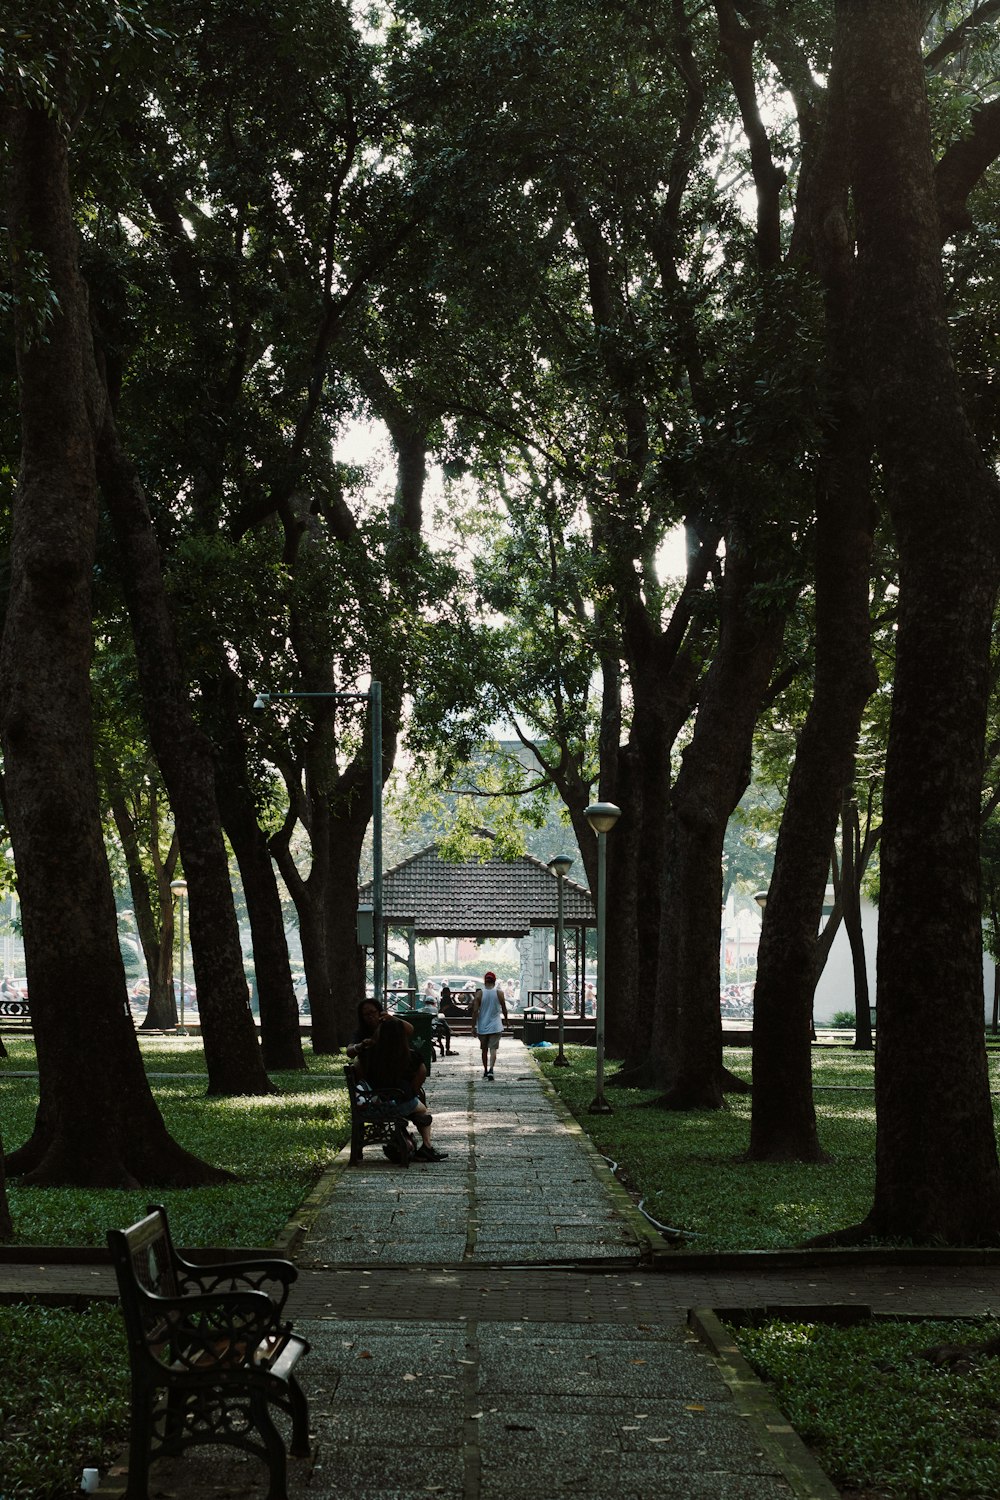 a park with benches, trees, and people walking